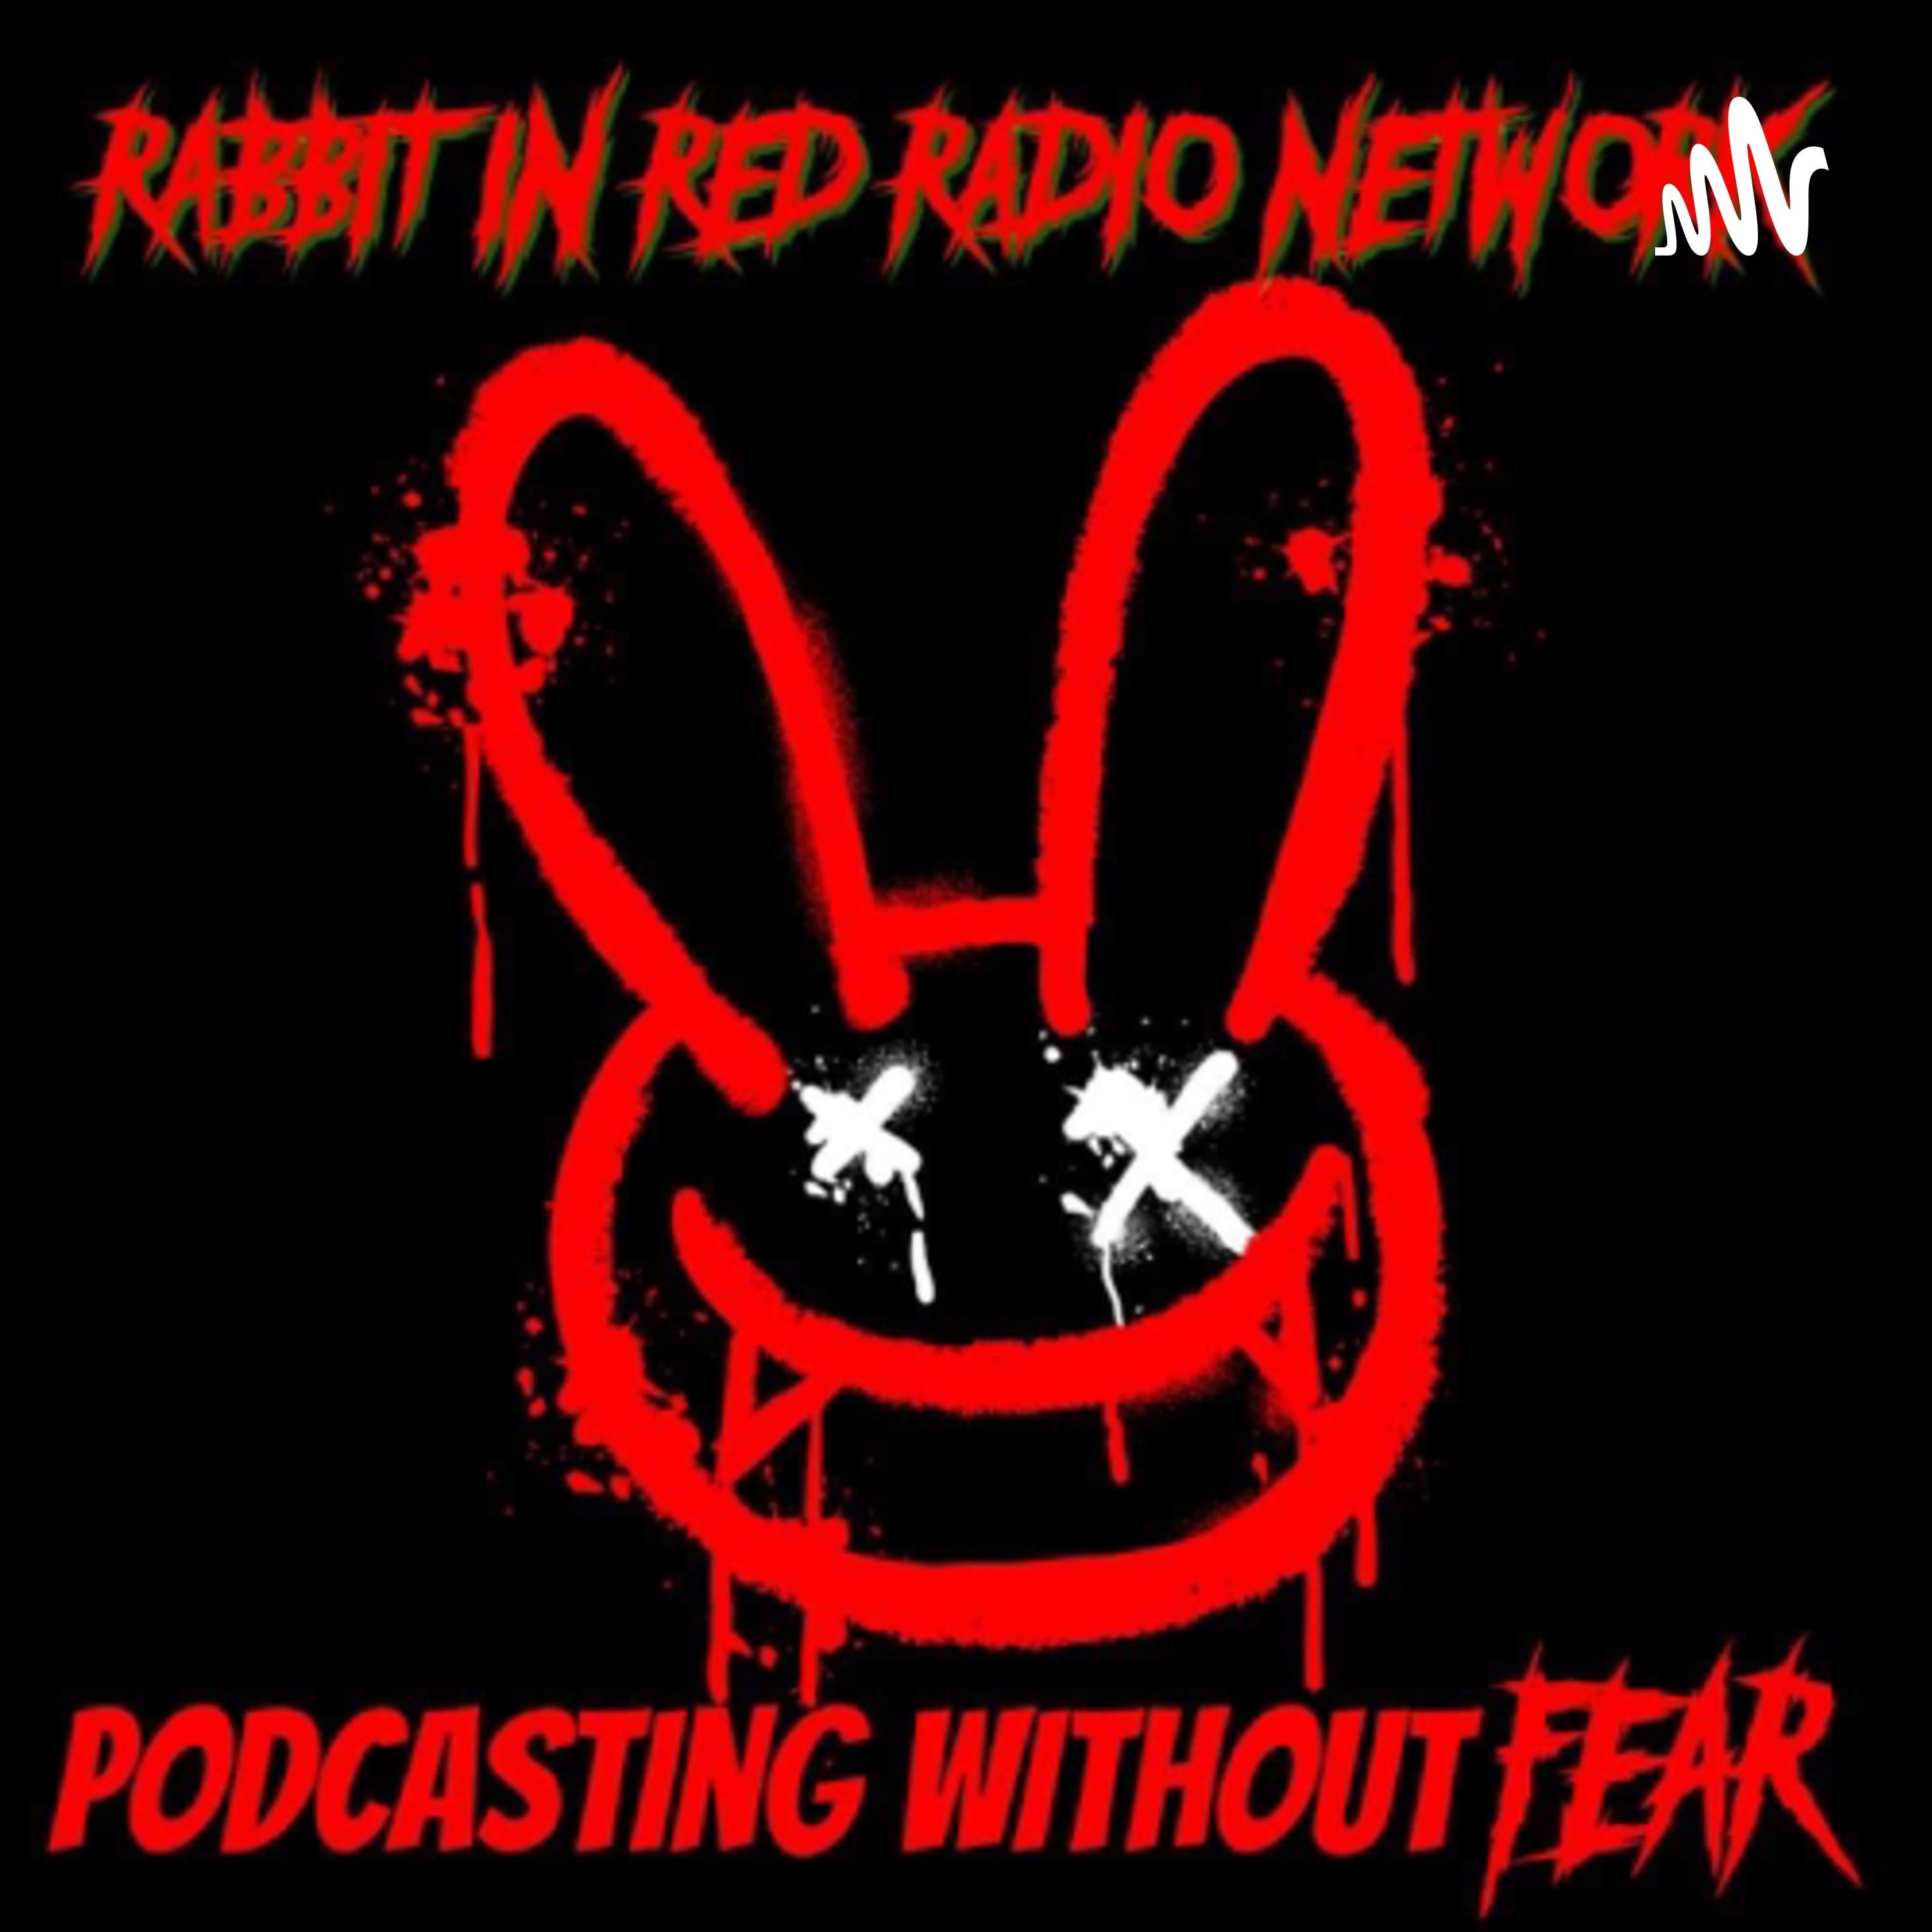 Jane Levy Anal Porn - Rabbit In Red Radio Network | RedCircle